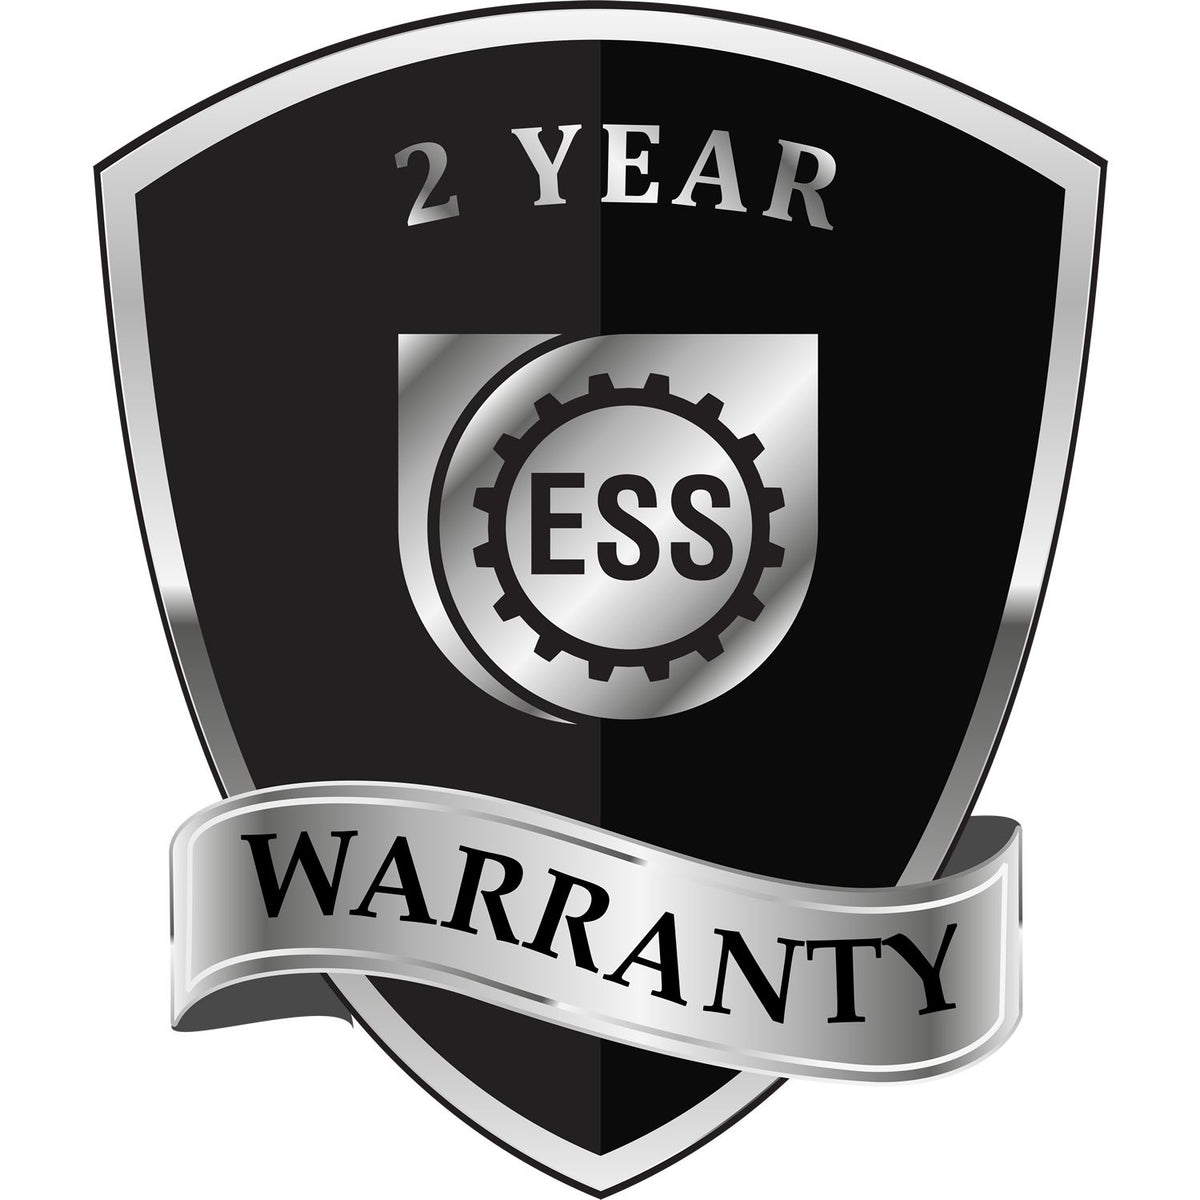 A black and silver badge or emblem showing warranty information for the Gift Hawaii Engineer Seal